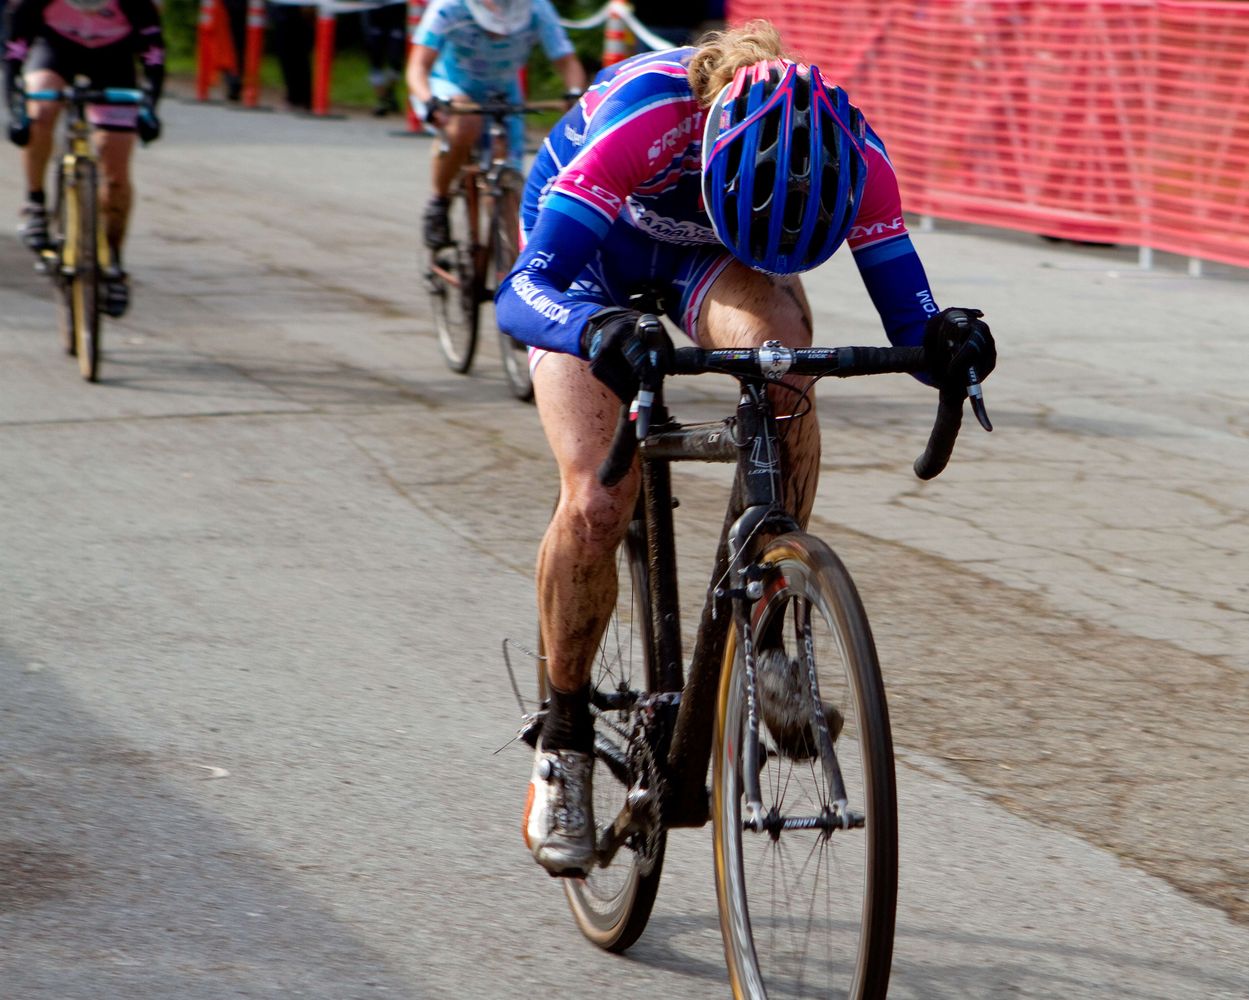 Karen Brems in World Champion time trial mode to finish third.   © Tim Westmore